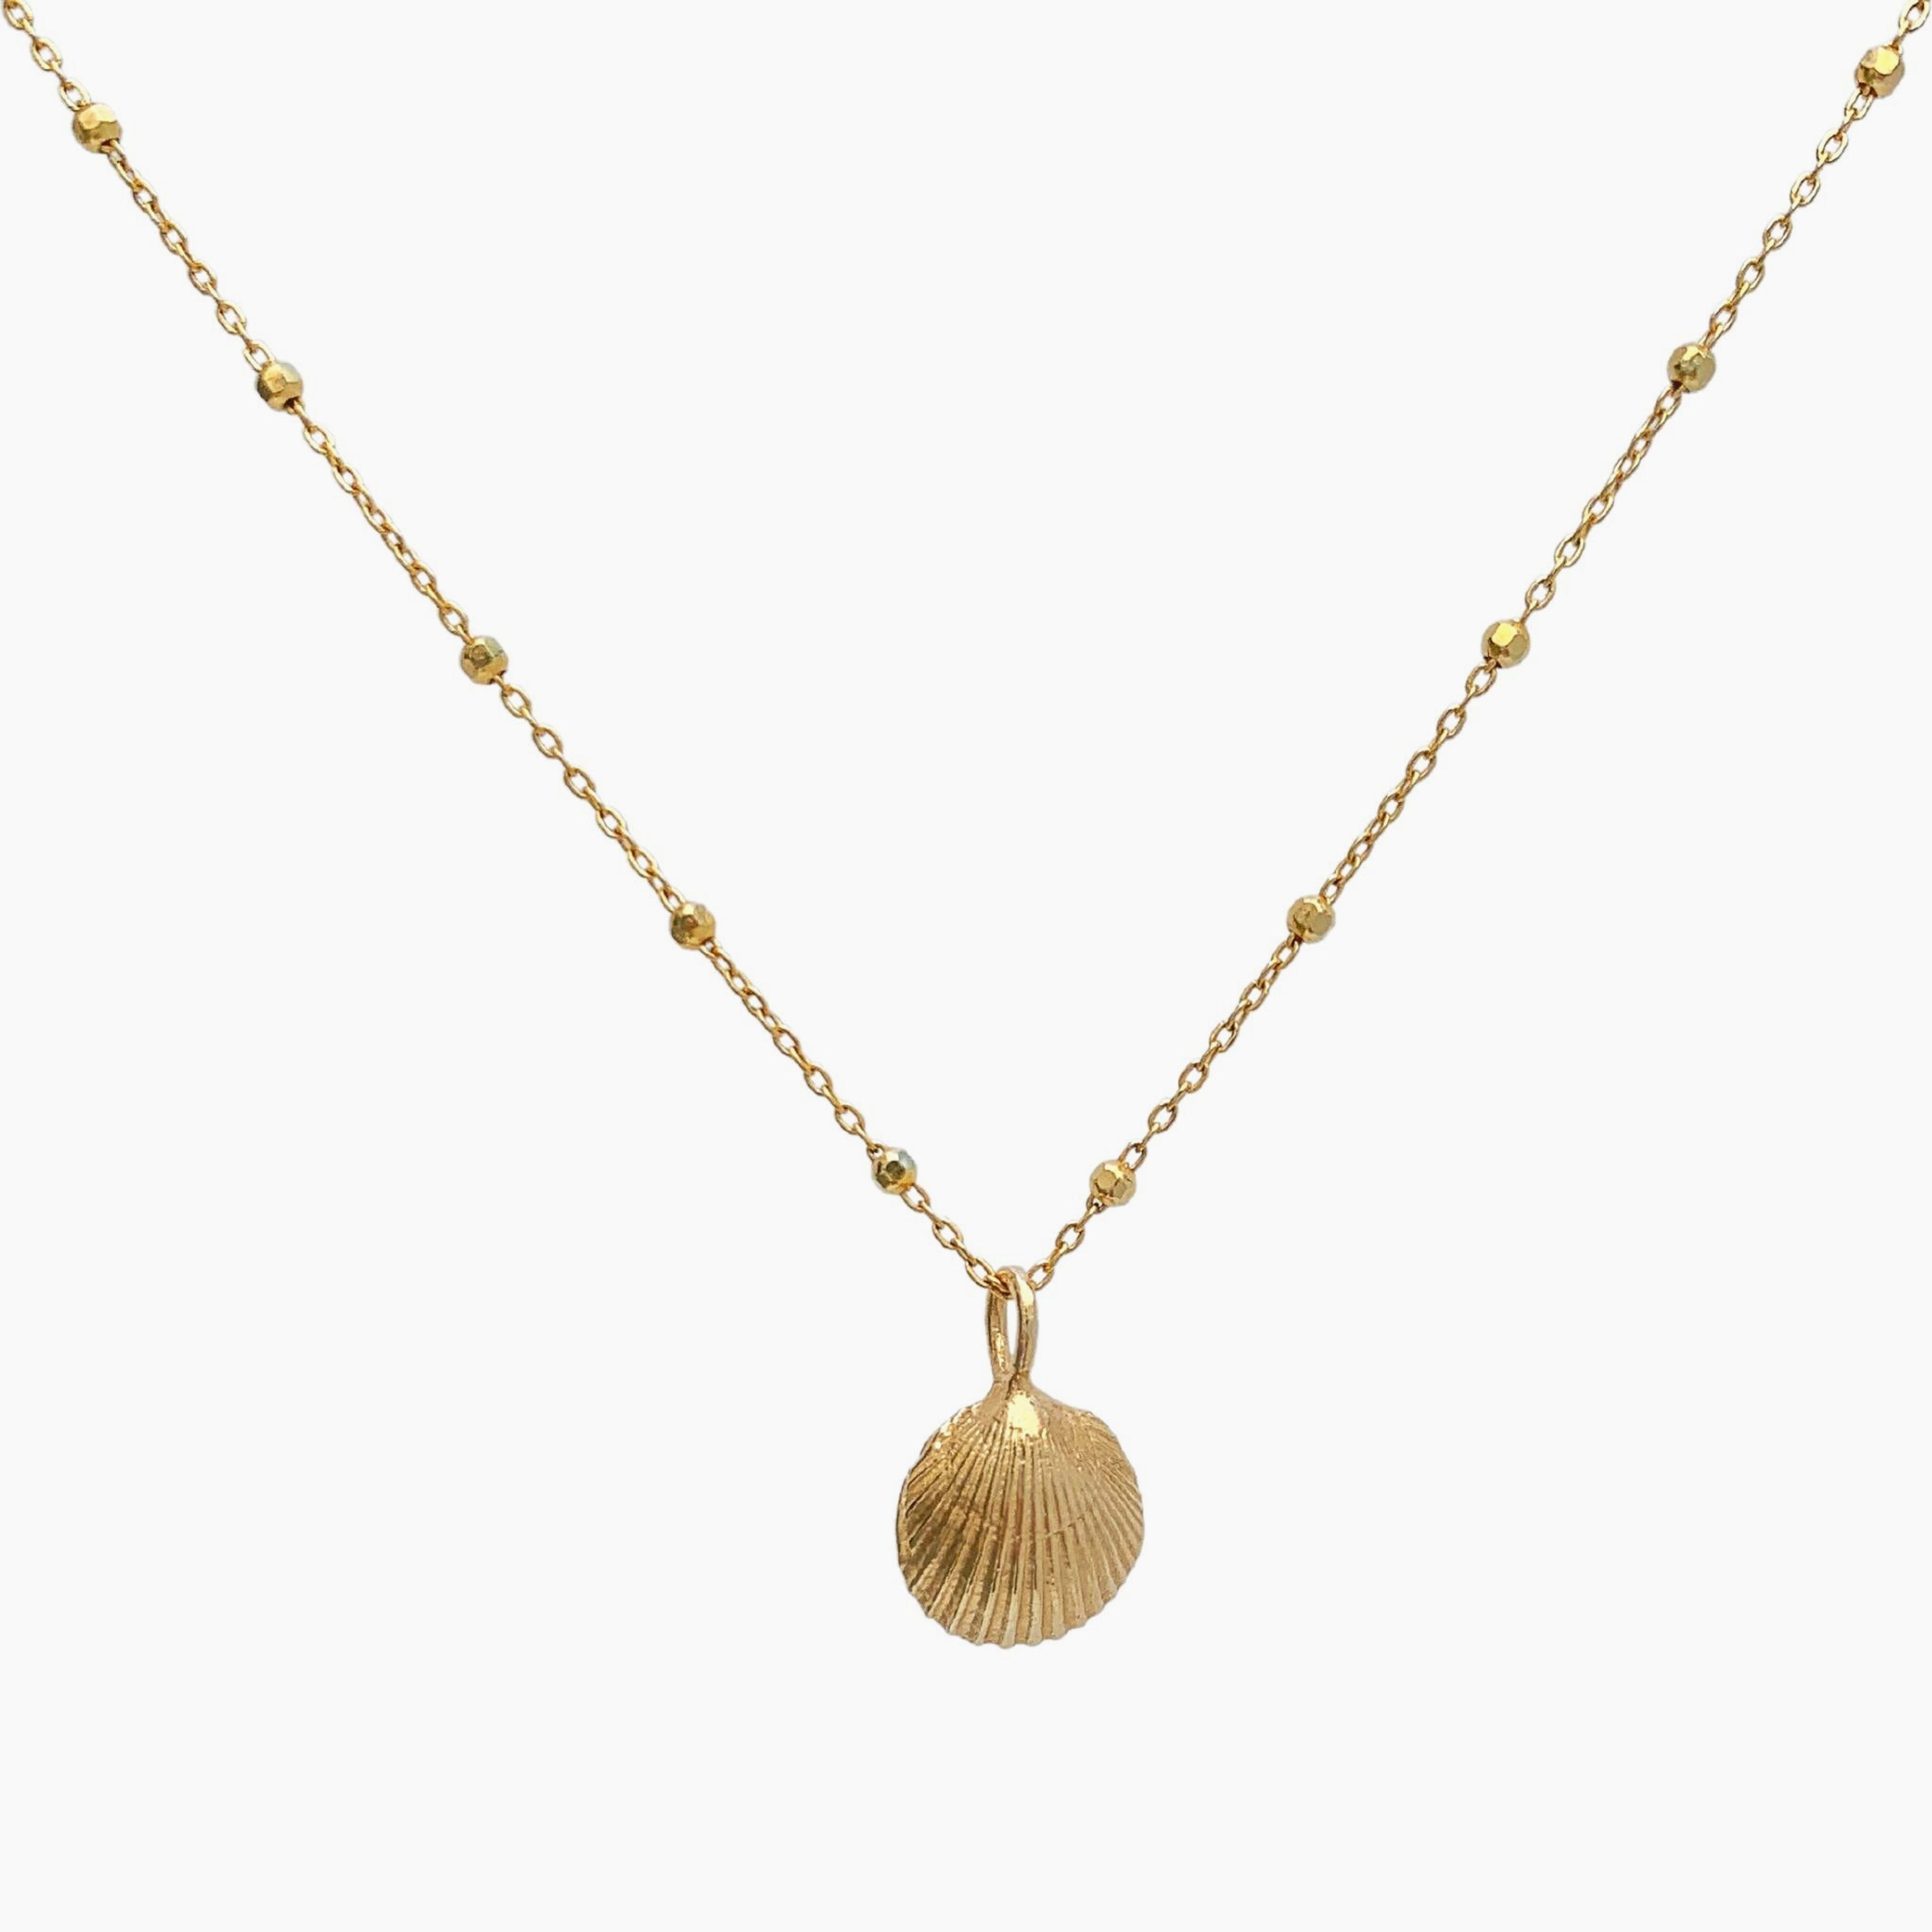 Seashell Necklace | Small | Solid 14k Gold